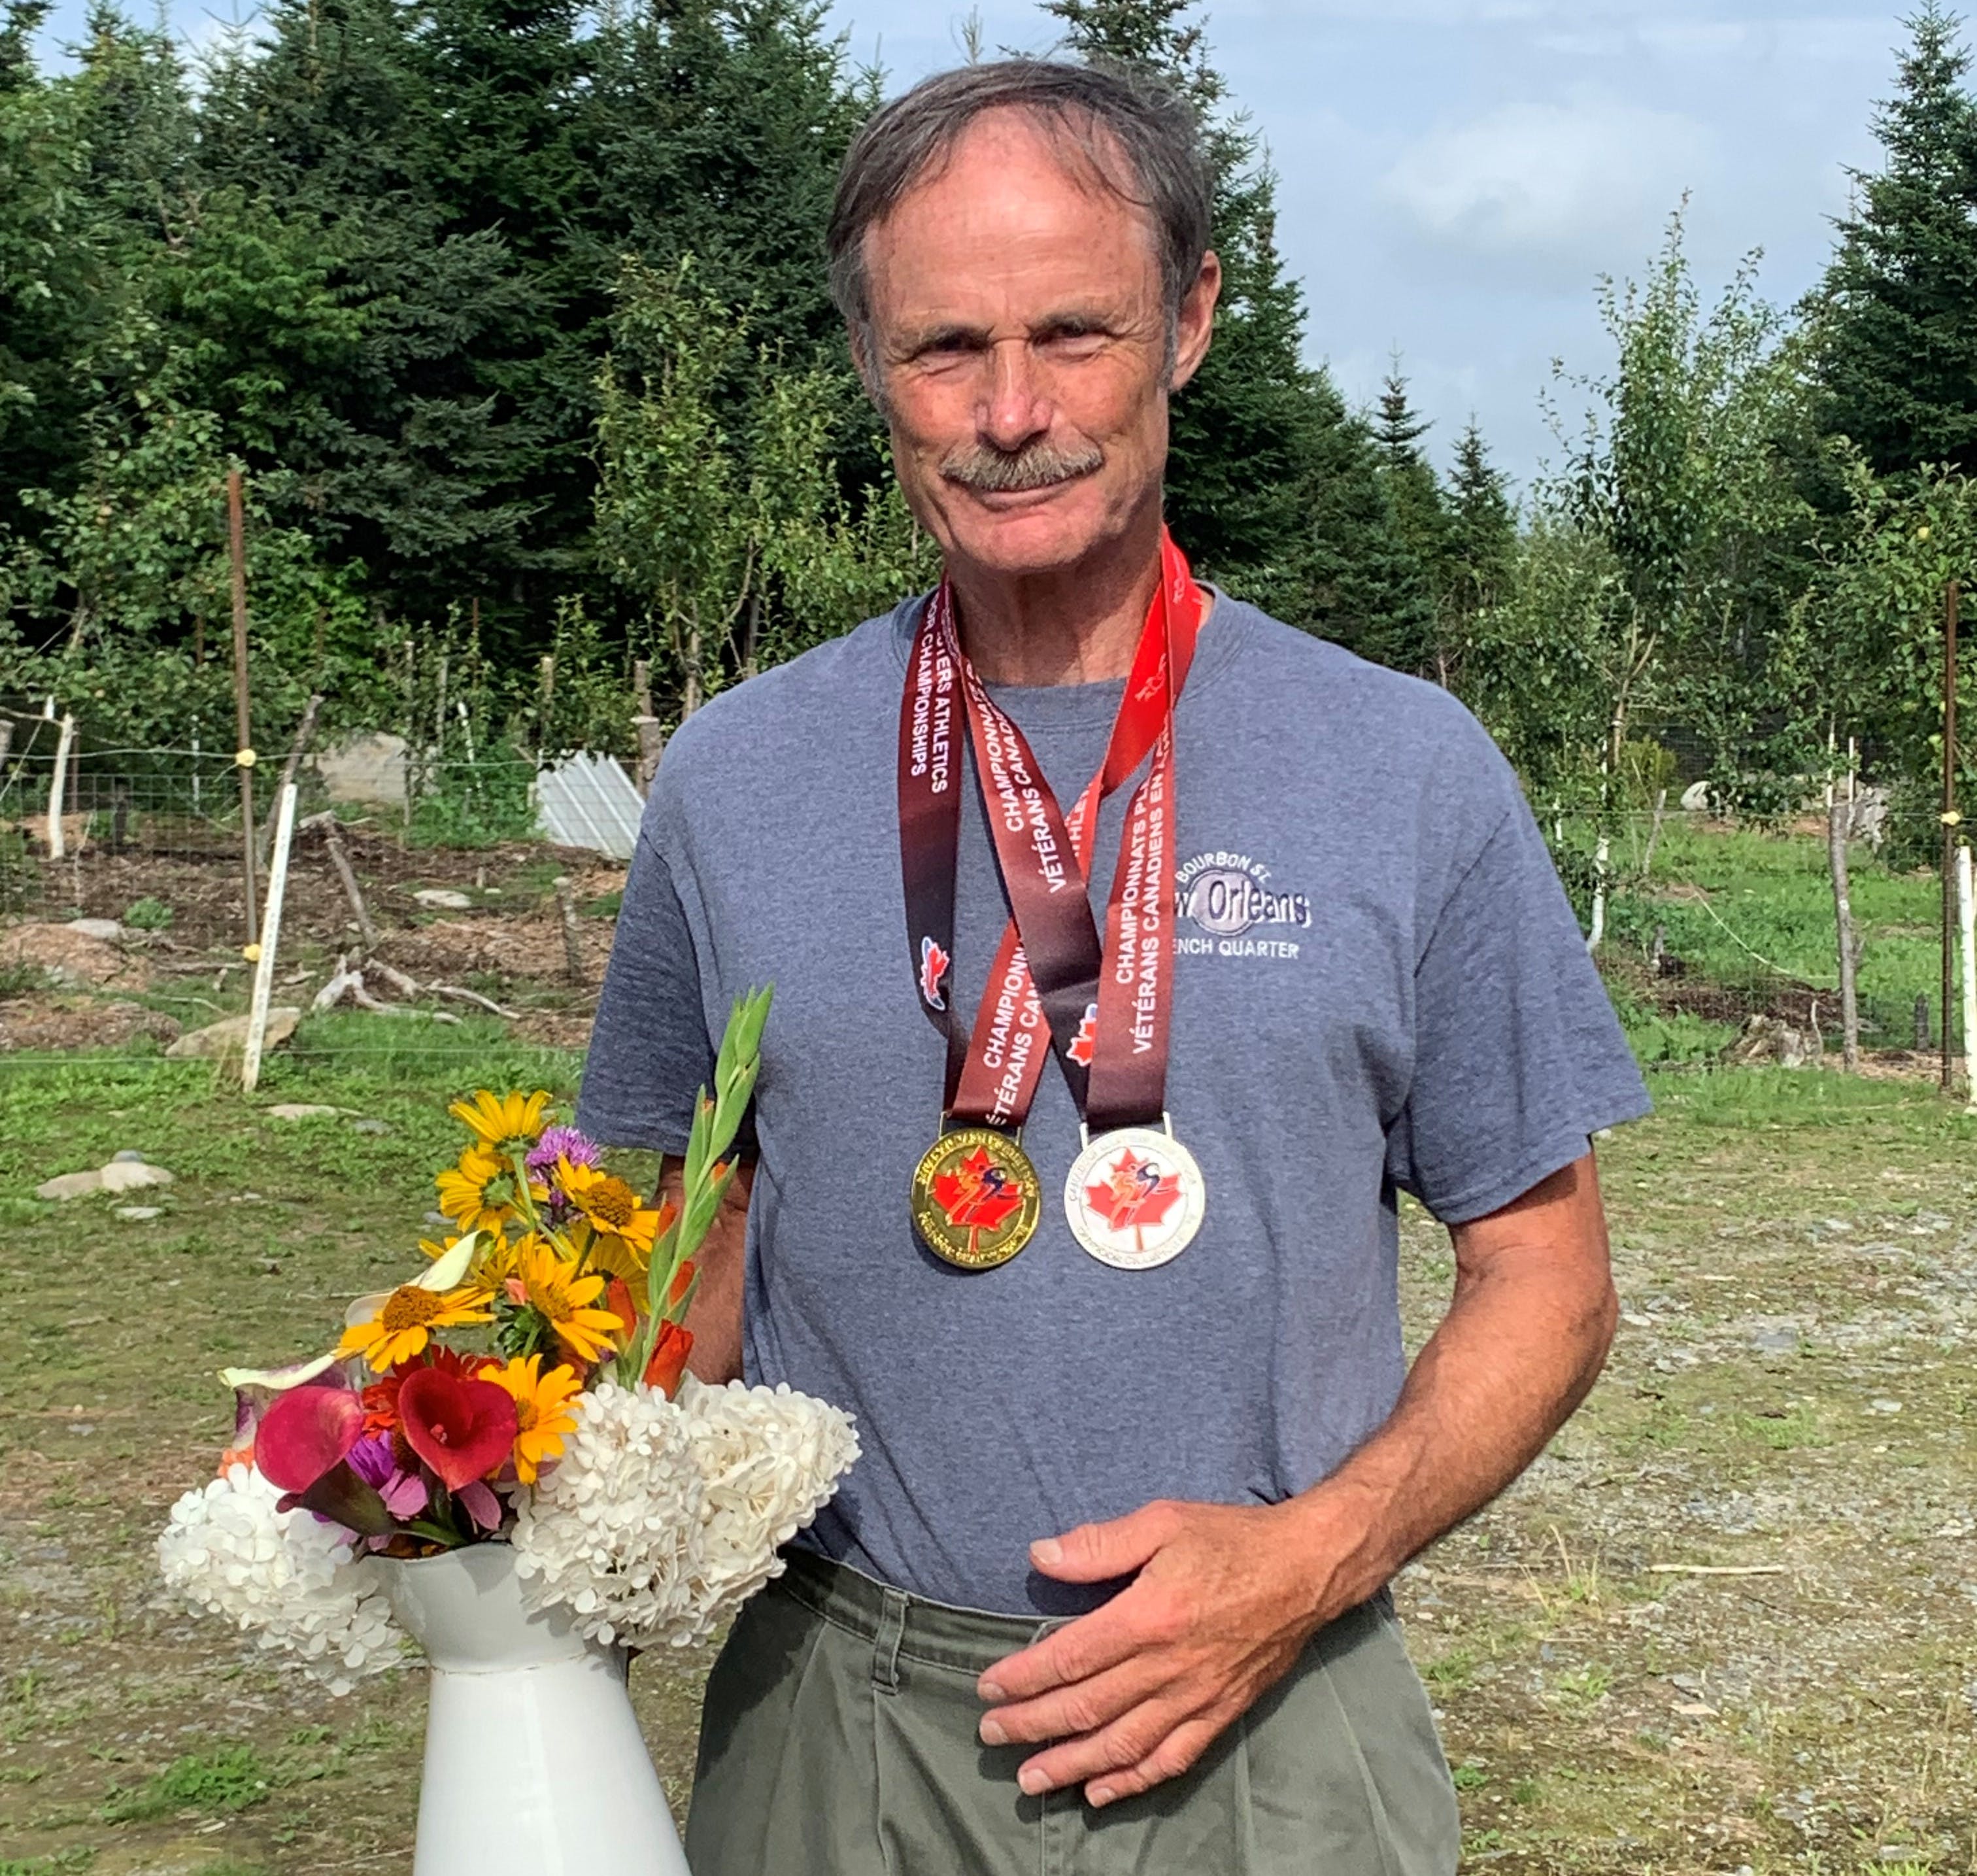 Ron Melchiore won gold in the 200 metres and silver in the 100m in his age group (65-69) at last month's Canadian Masters Athletics outdoor championships in Langley, B.C. - Bonnie Fleming / Contributed